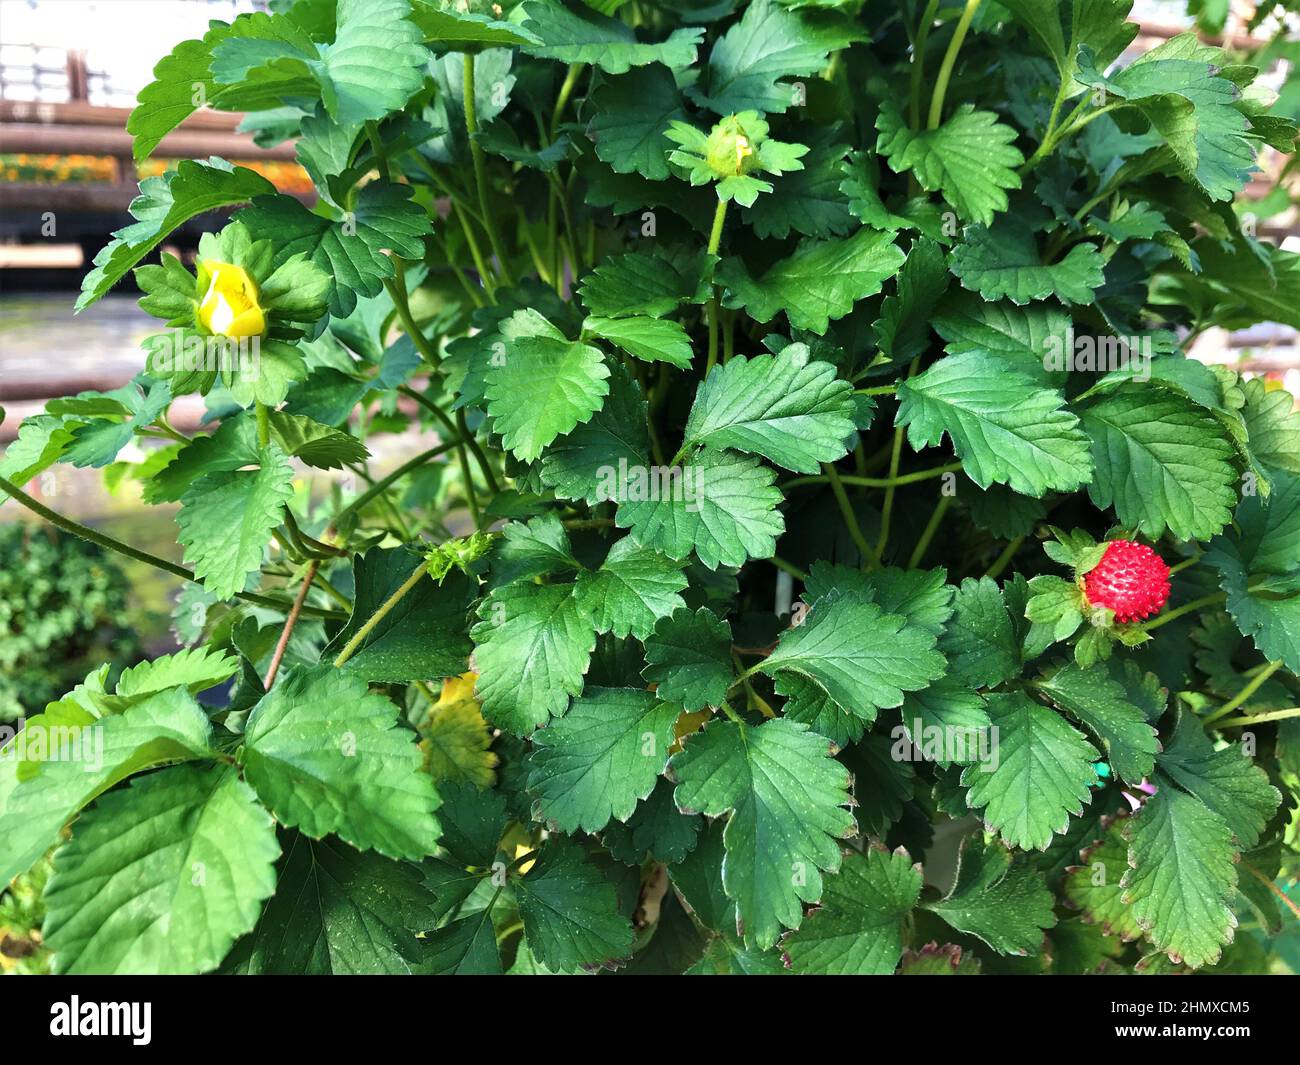 False strawberries Potentilla indica hanging pot with large red berries and yellow flowers on the background. Stock Photo